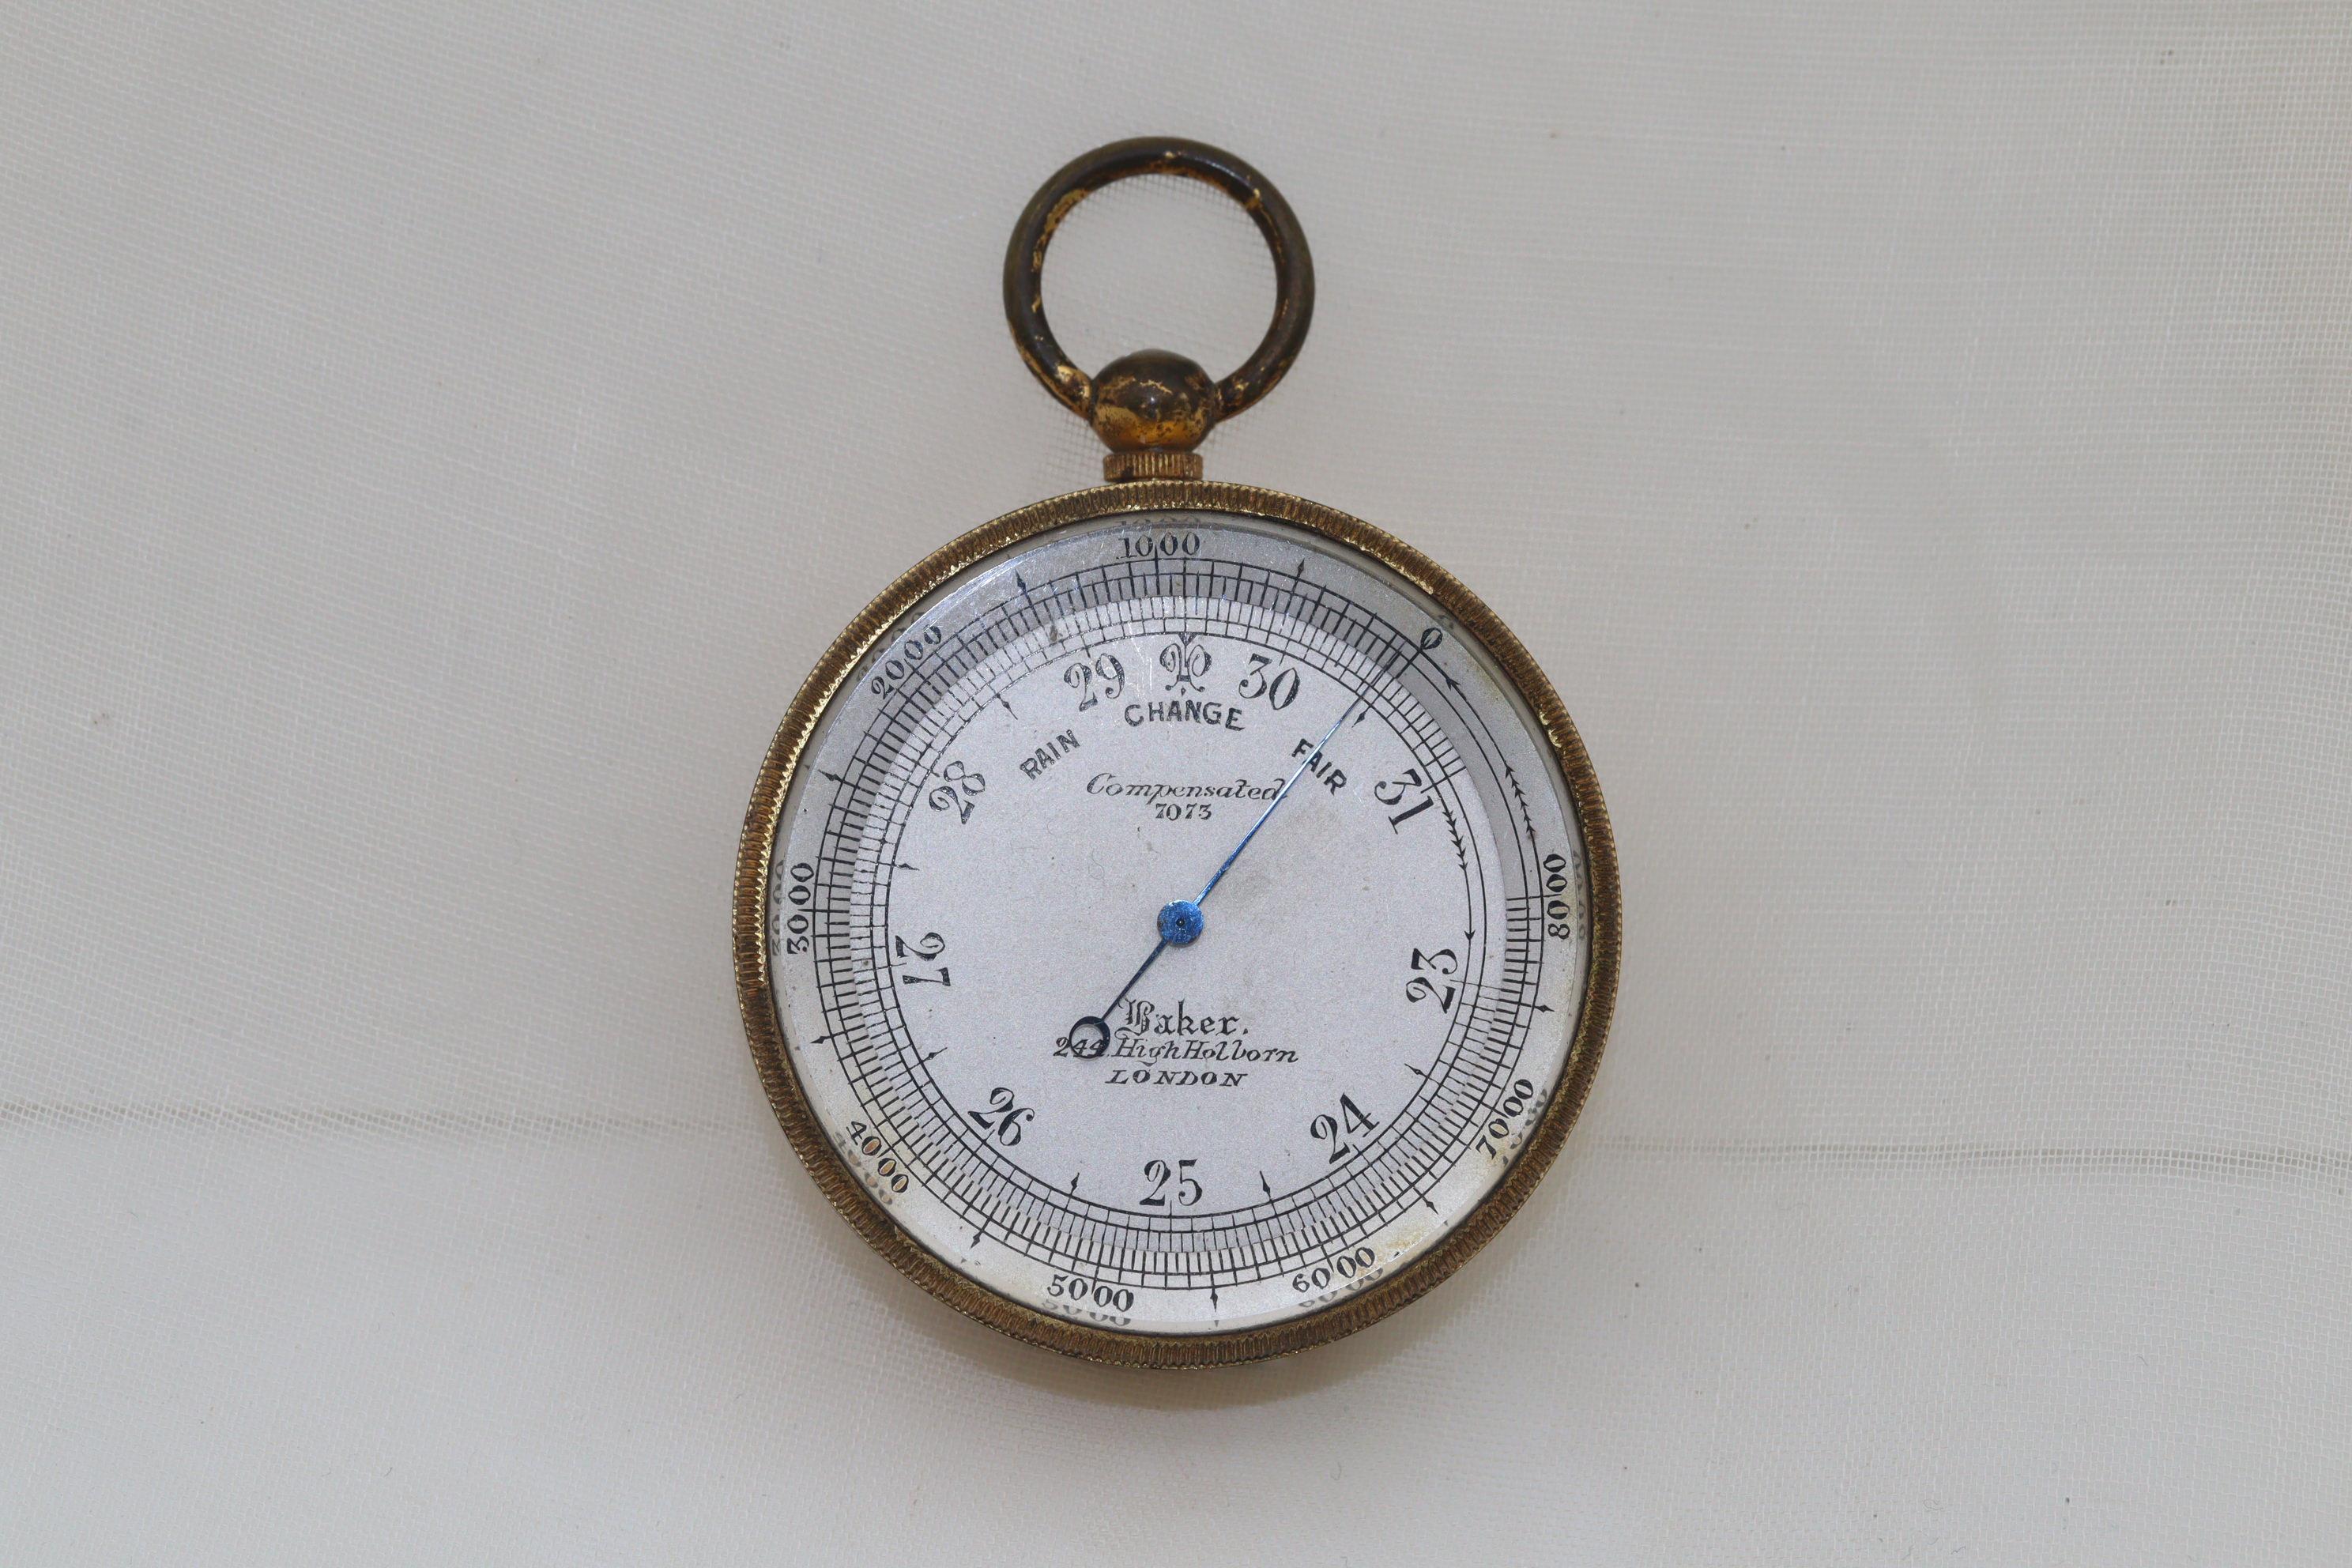 This pocket barometer was made by the firm of C Baker of 244 High Holborn, London and is still in its original leather covered case. The model number is 7073, and the silvered dial with its blued pointer is surrounded by a rotating altimeter ring.